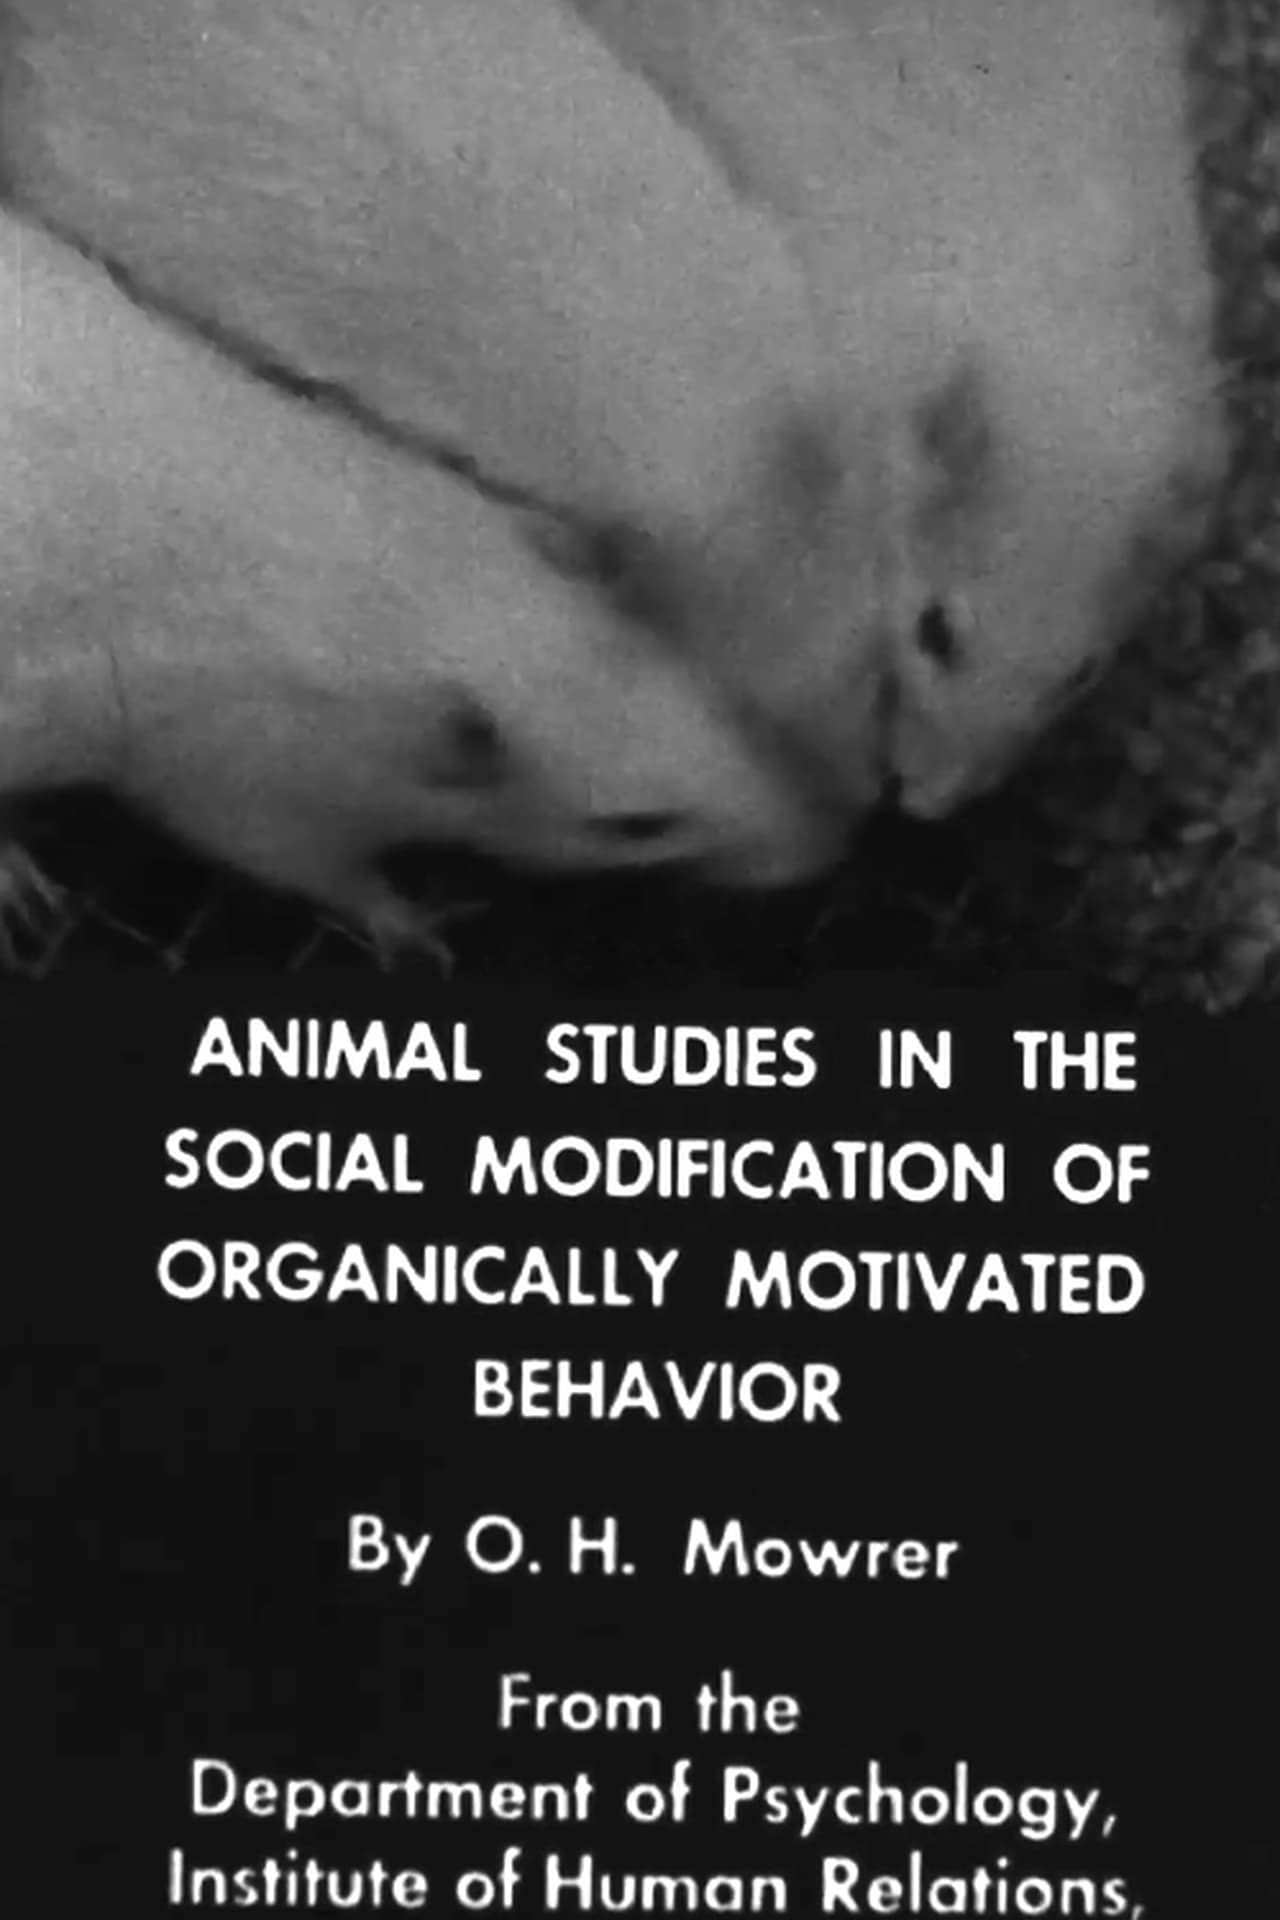 Animal Studies in the Social Modification of Organically Motivated Behavior